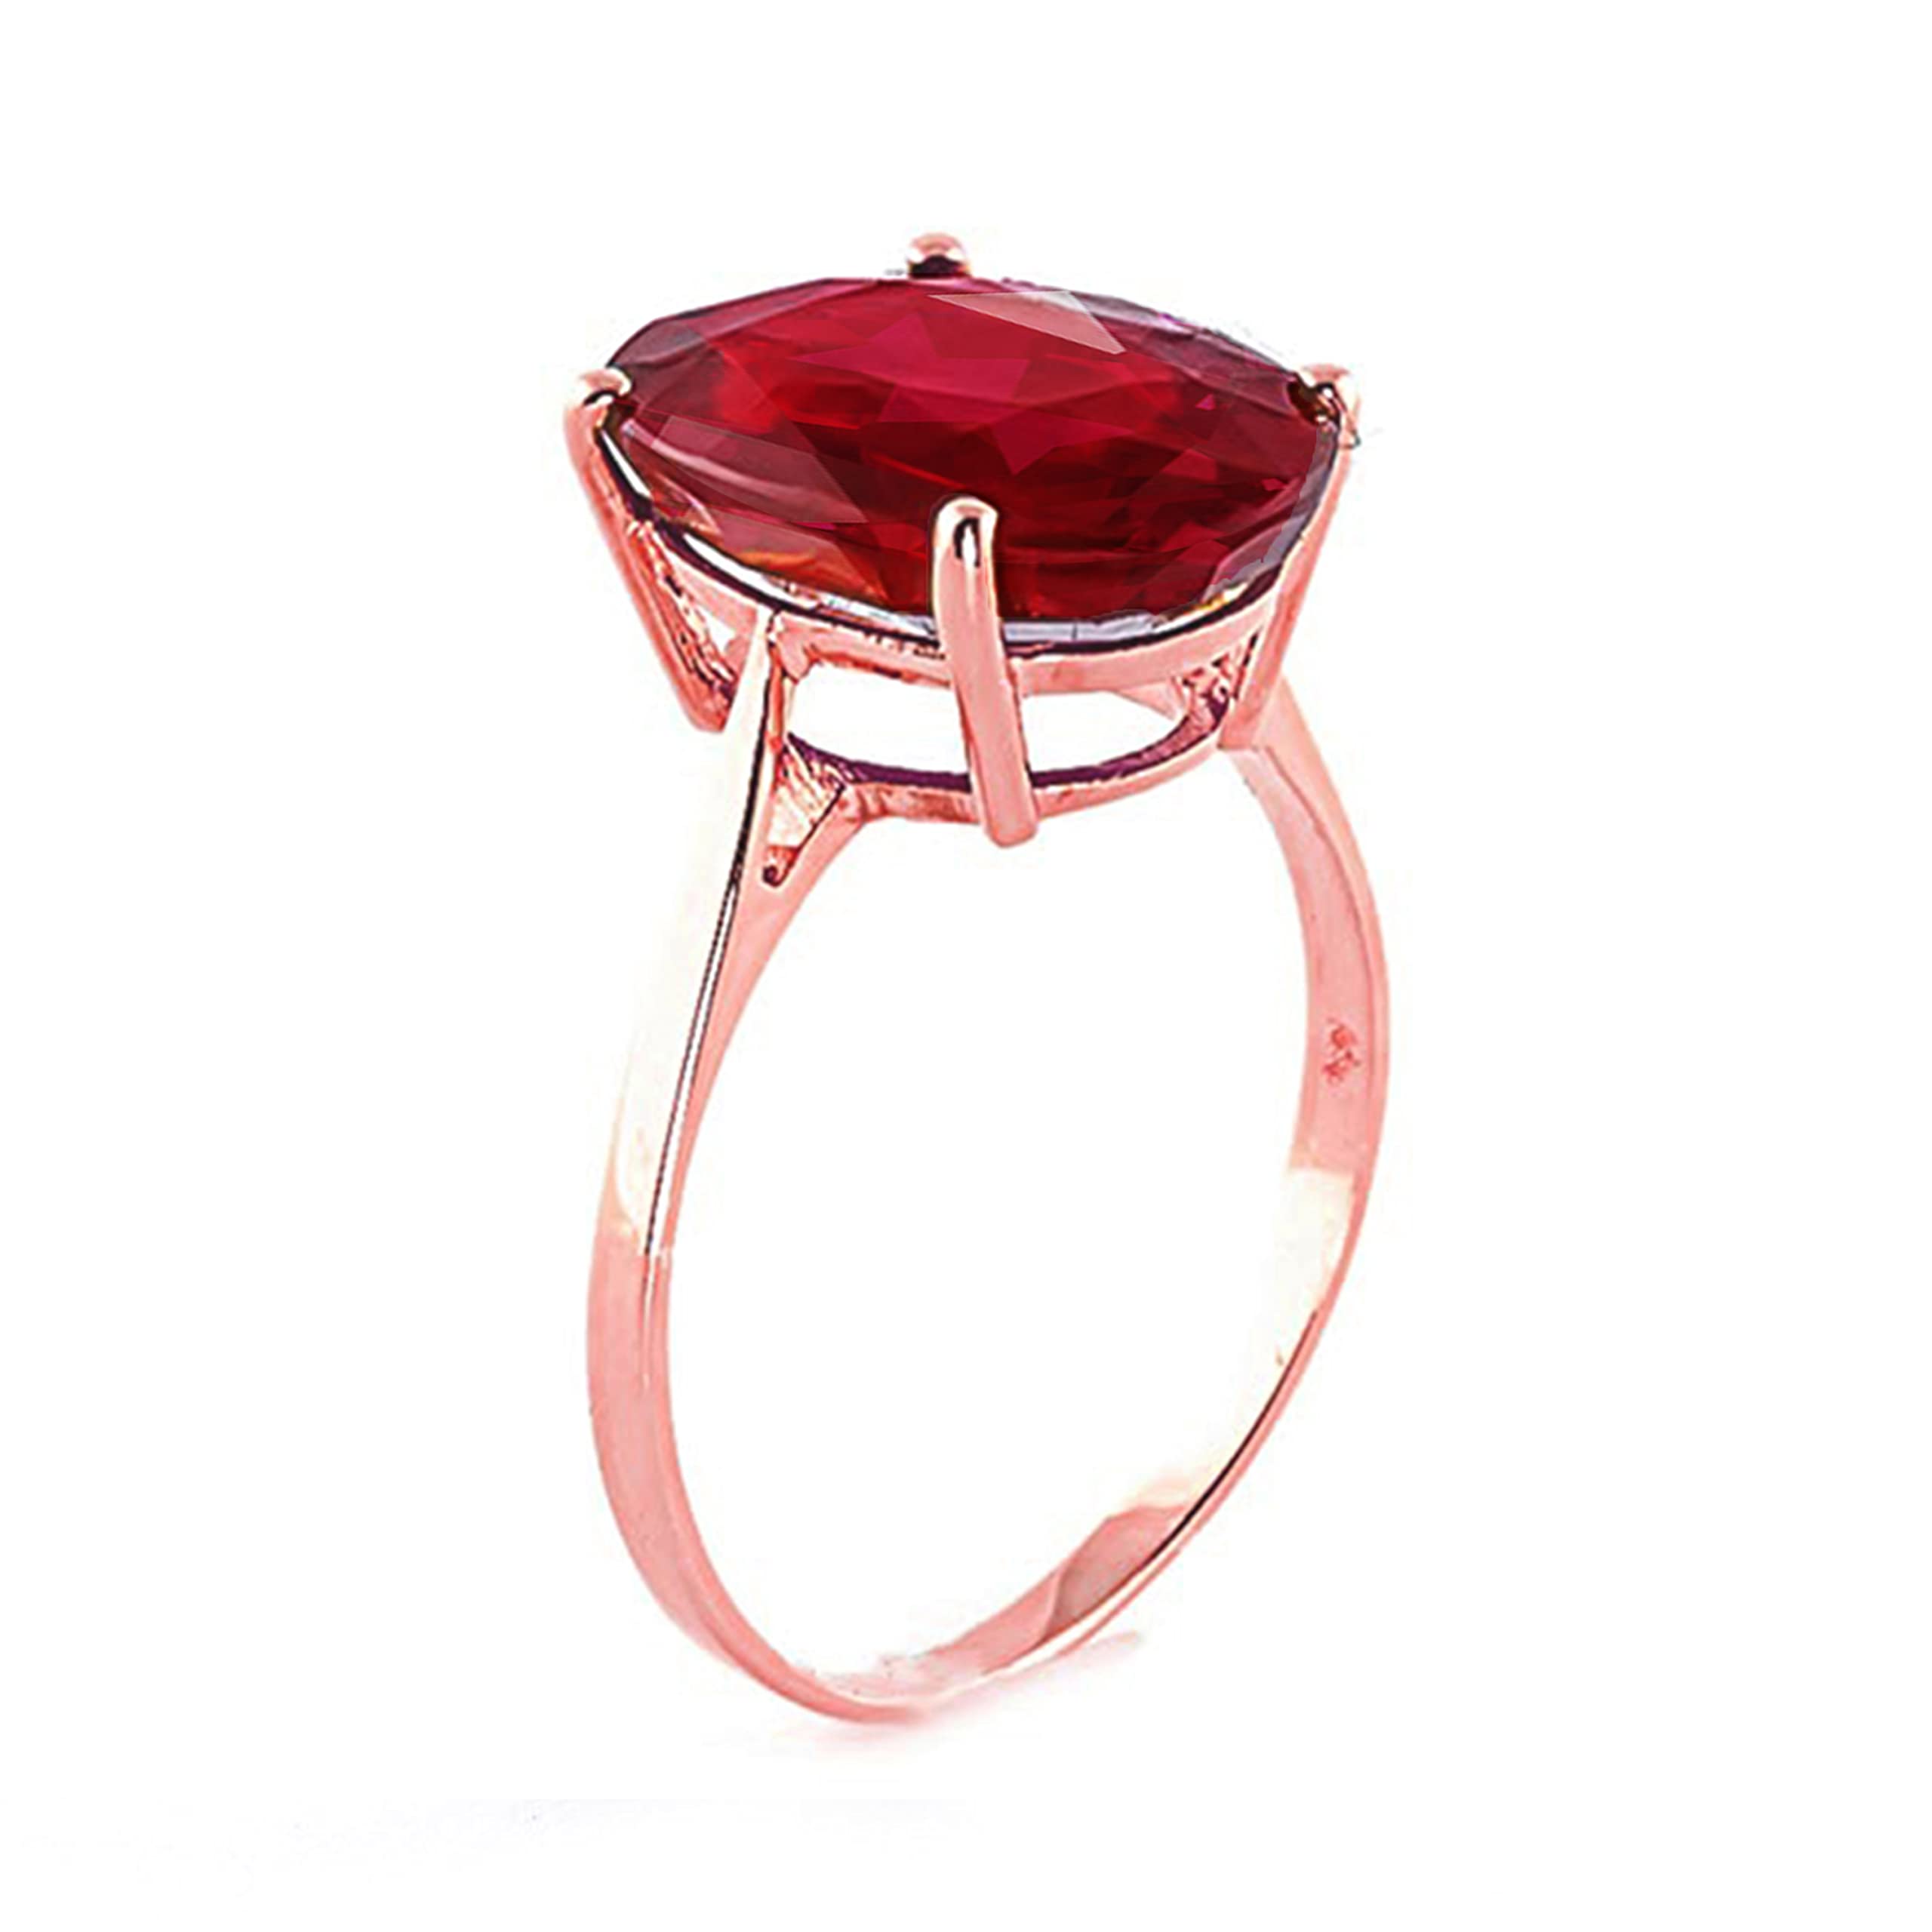 Galaxy Gold GG 14k Solid Rose Gold Ring 7.5 ct Oval-Shaped Ruby